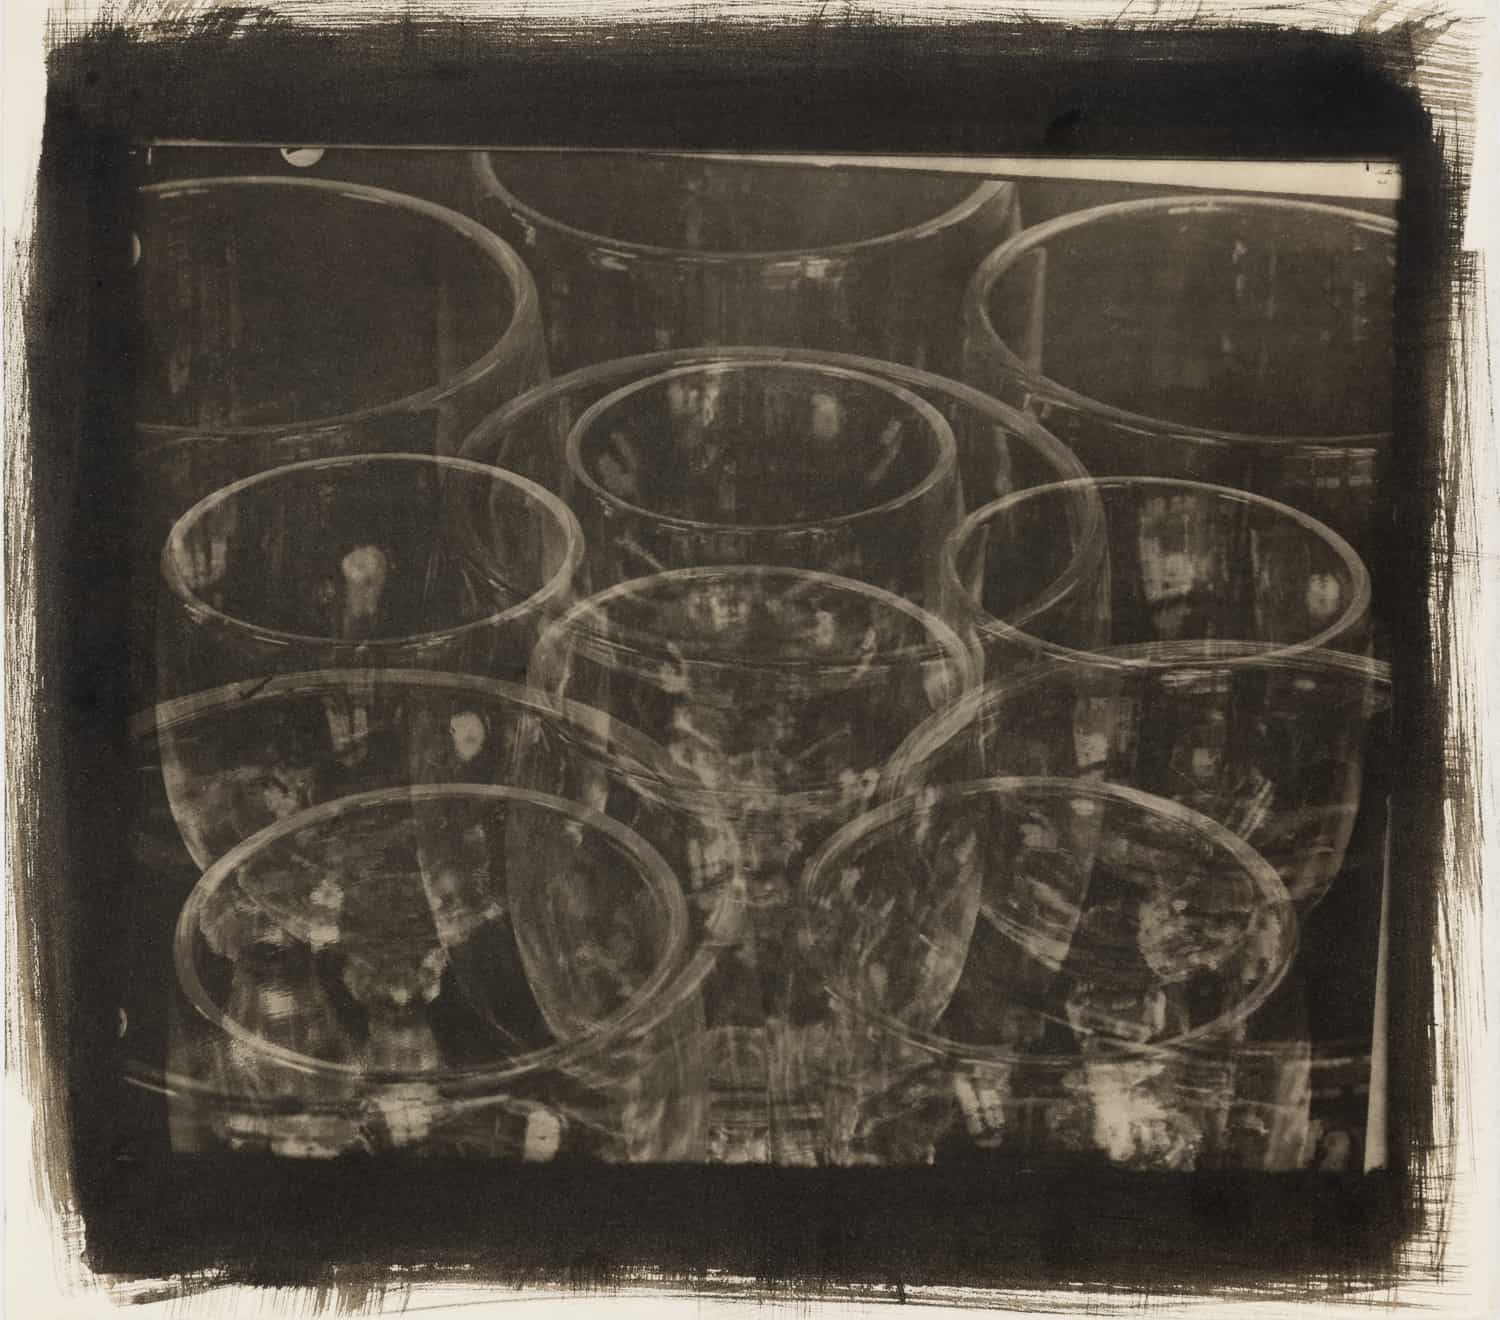 Tina Modotti, Experiment in Related From or Glasses, 1924. Modern Objects, Huxley-Parlour Gallery, 3–5 Swallow St, London, W1B 4DE